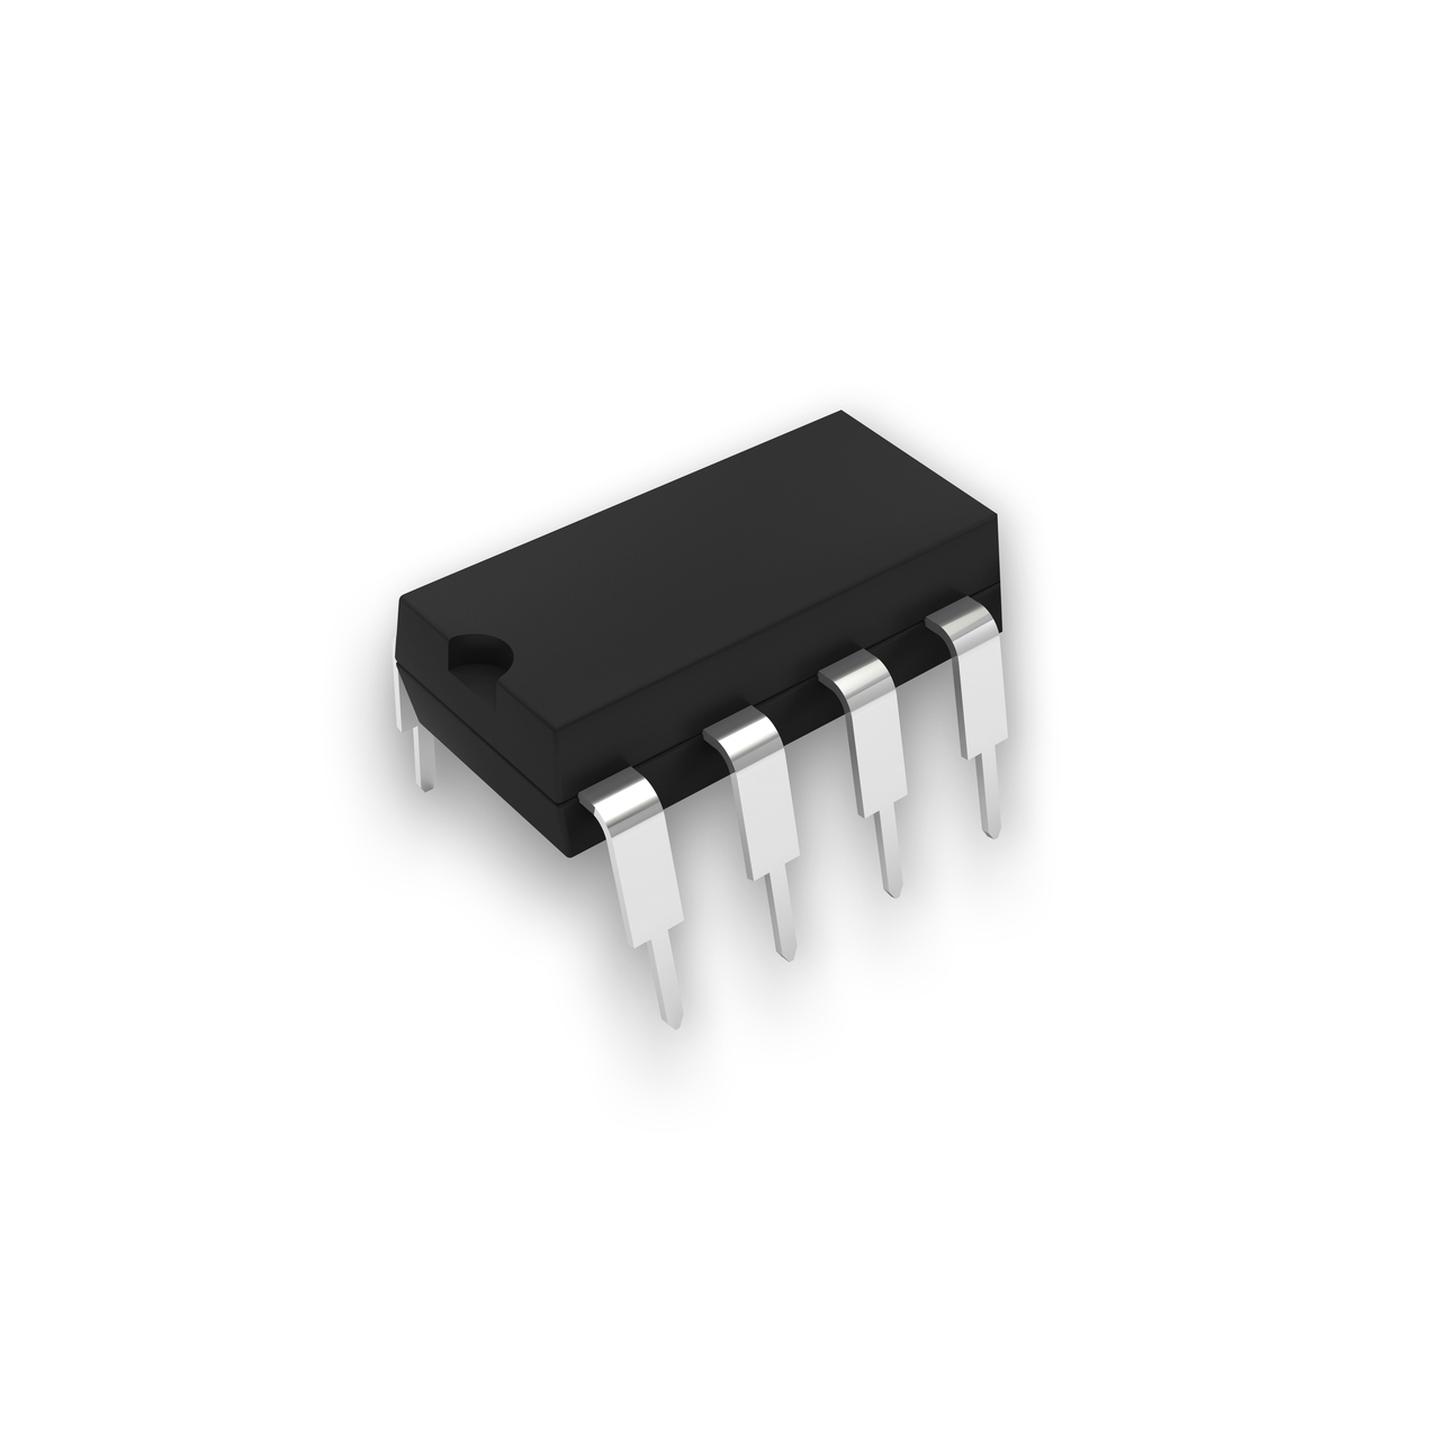 LM358 Low Power Dual Op-Amp Linear IC